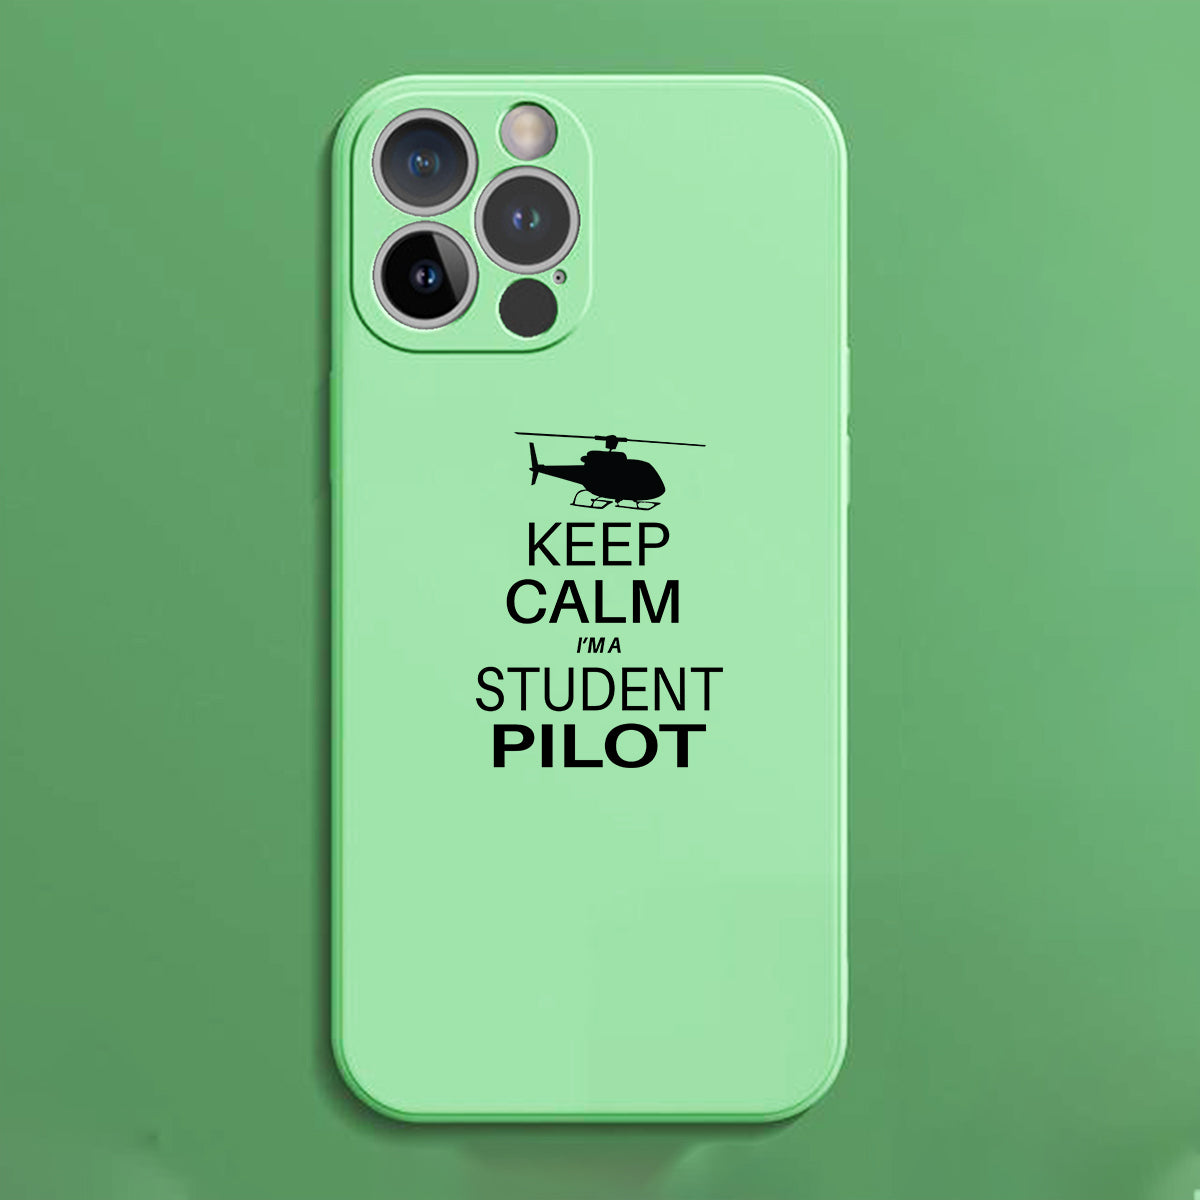 Student Pilot (Helicopter) Designed Soft Silicone iPhone Cases